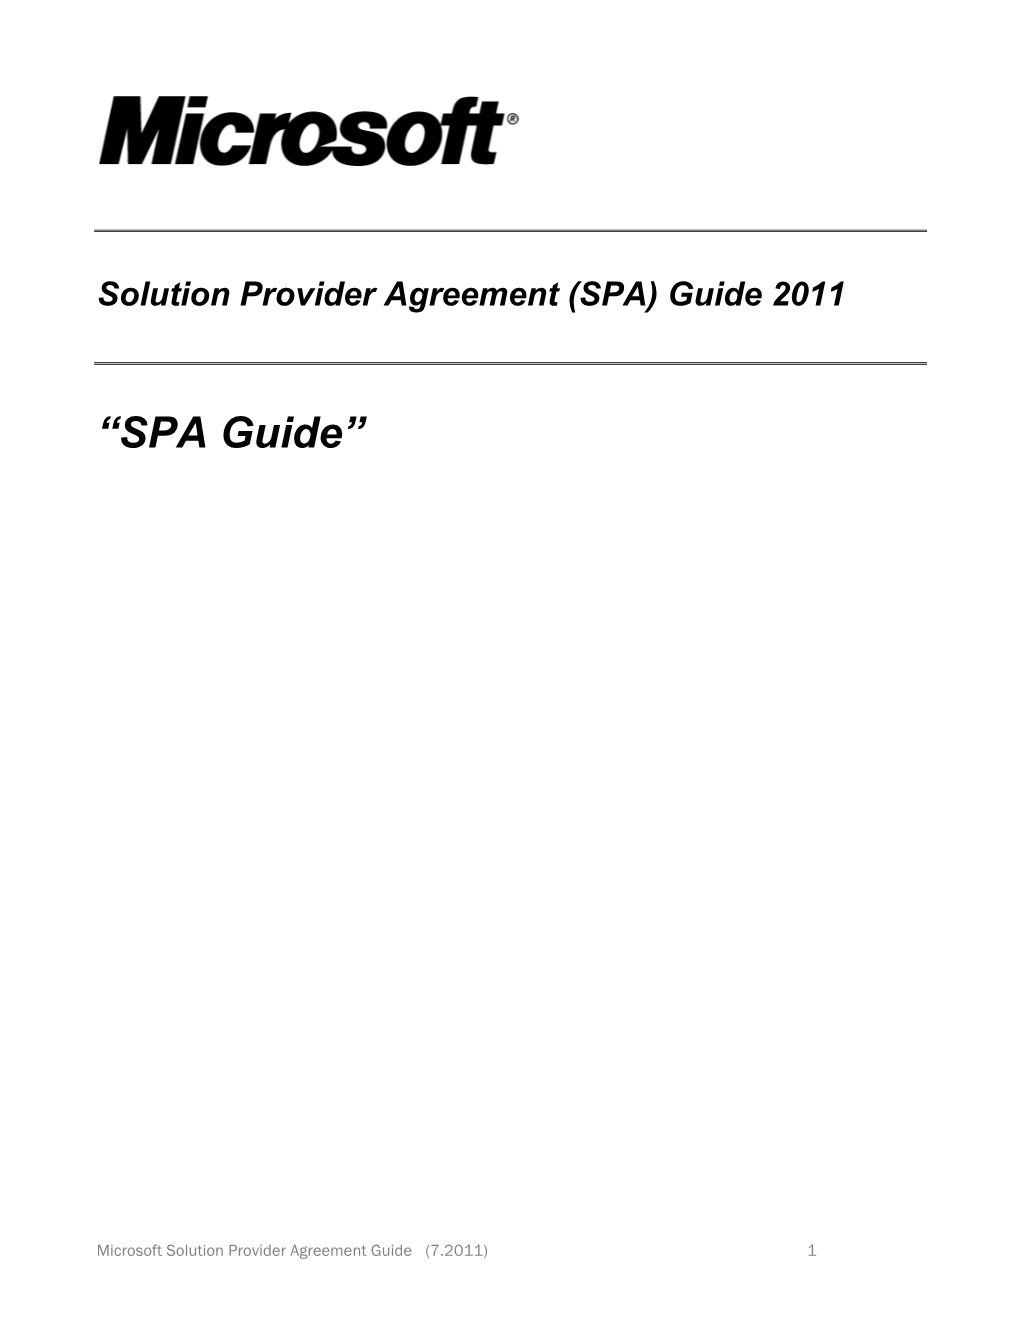 Solution Provider Agreement (SPA) Guide 2011